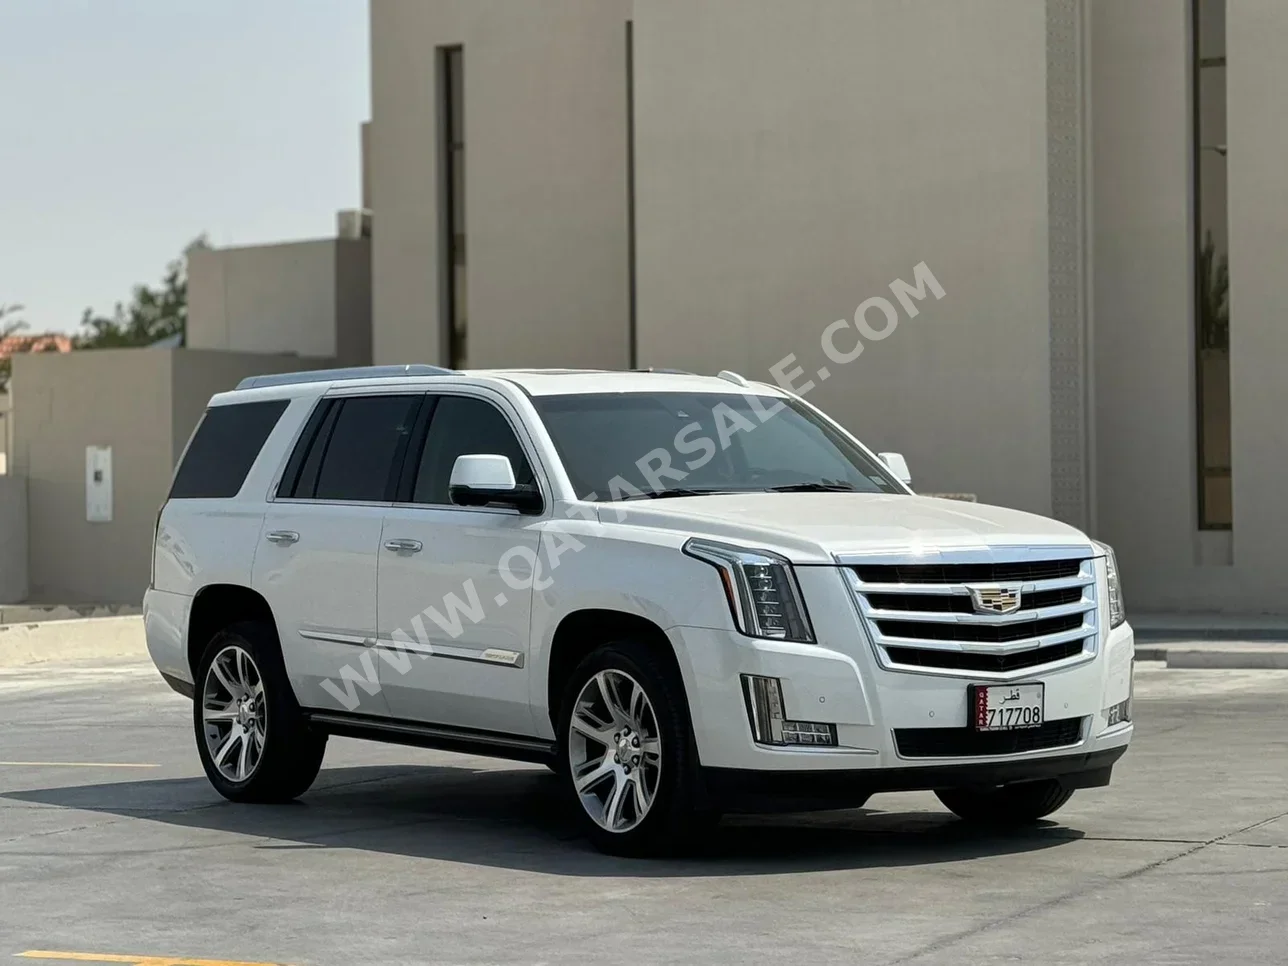 Cadillac  Escalade  2016  Automatic  131,000 Km  8 Cylinder  Four Wheel Drive (4WD)  SUV  White